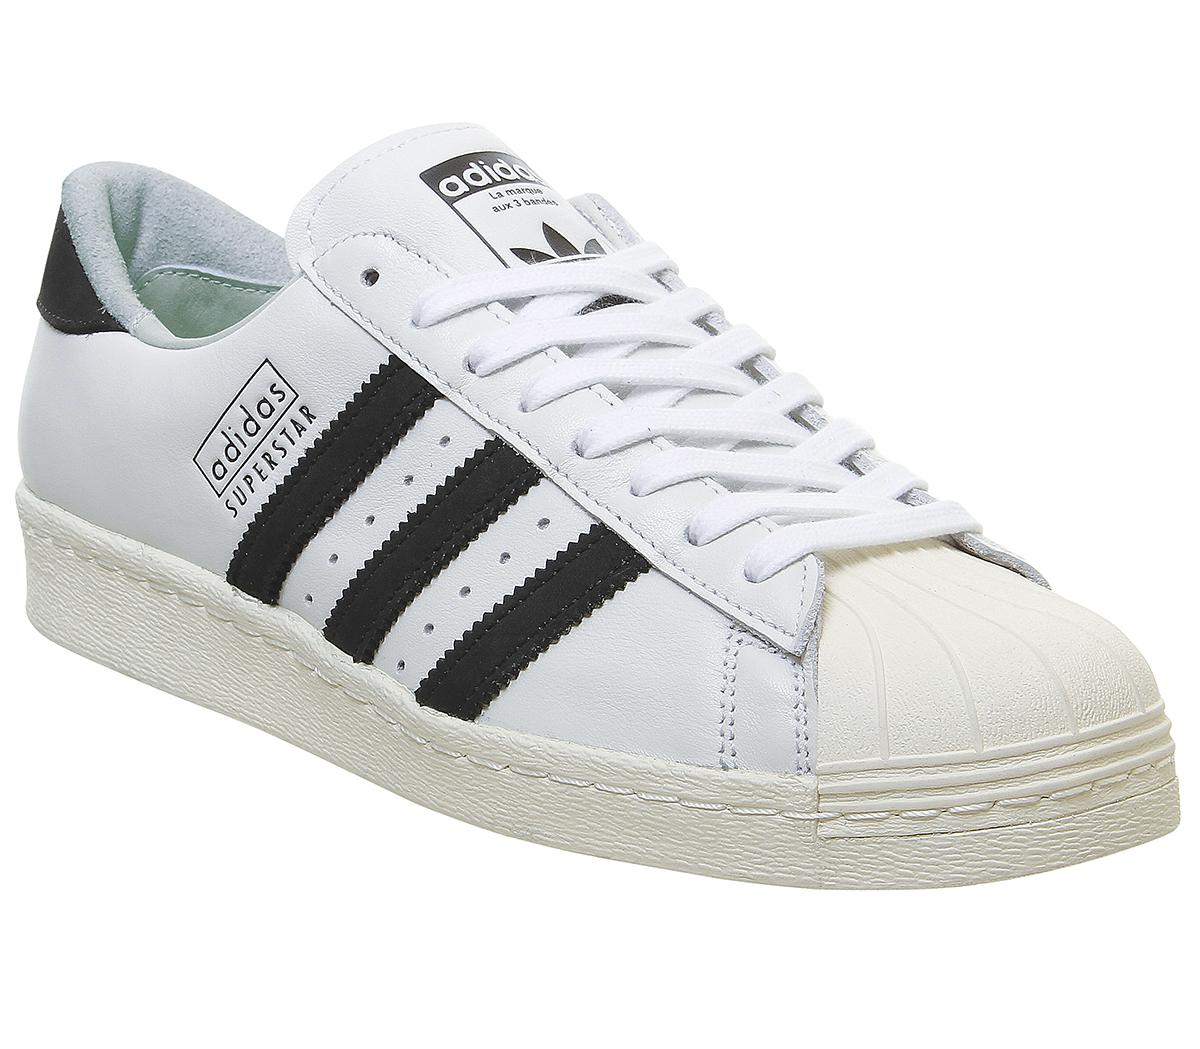 adidas Superstar 80s Trainers White Core Black Off White - Unisex Sports